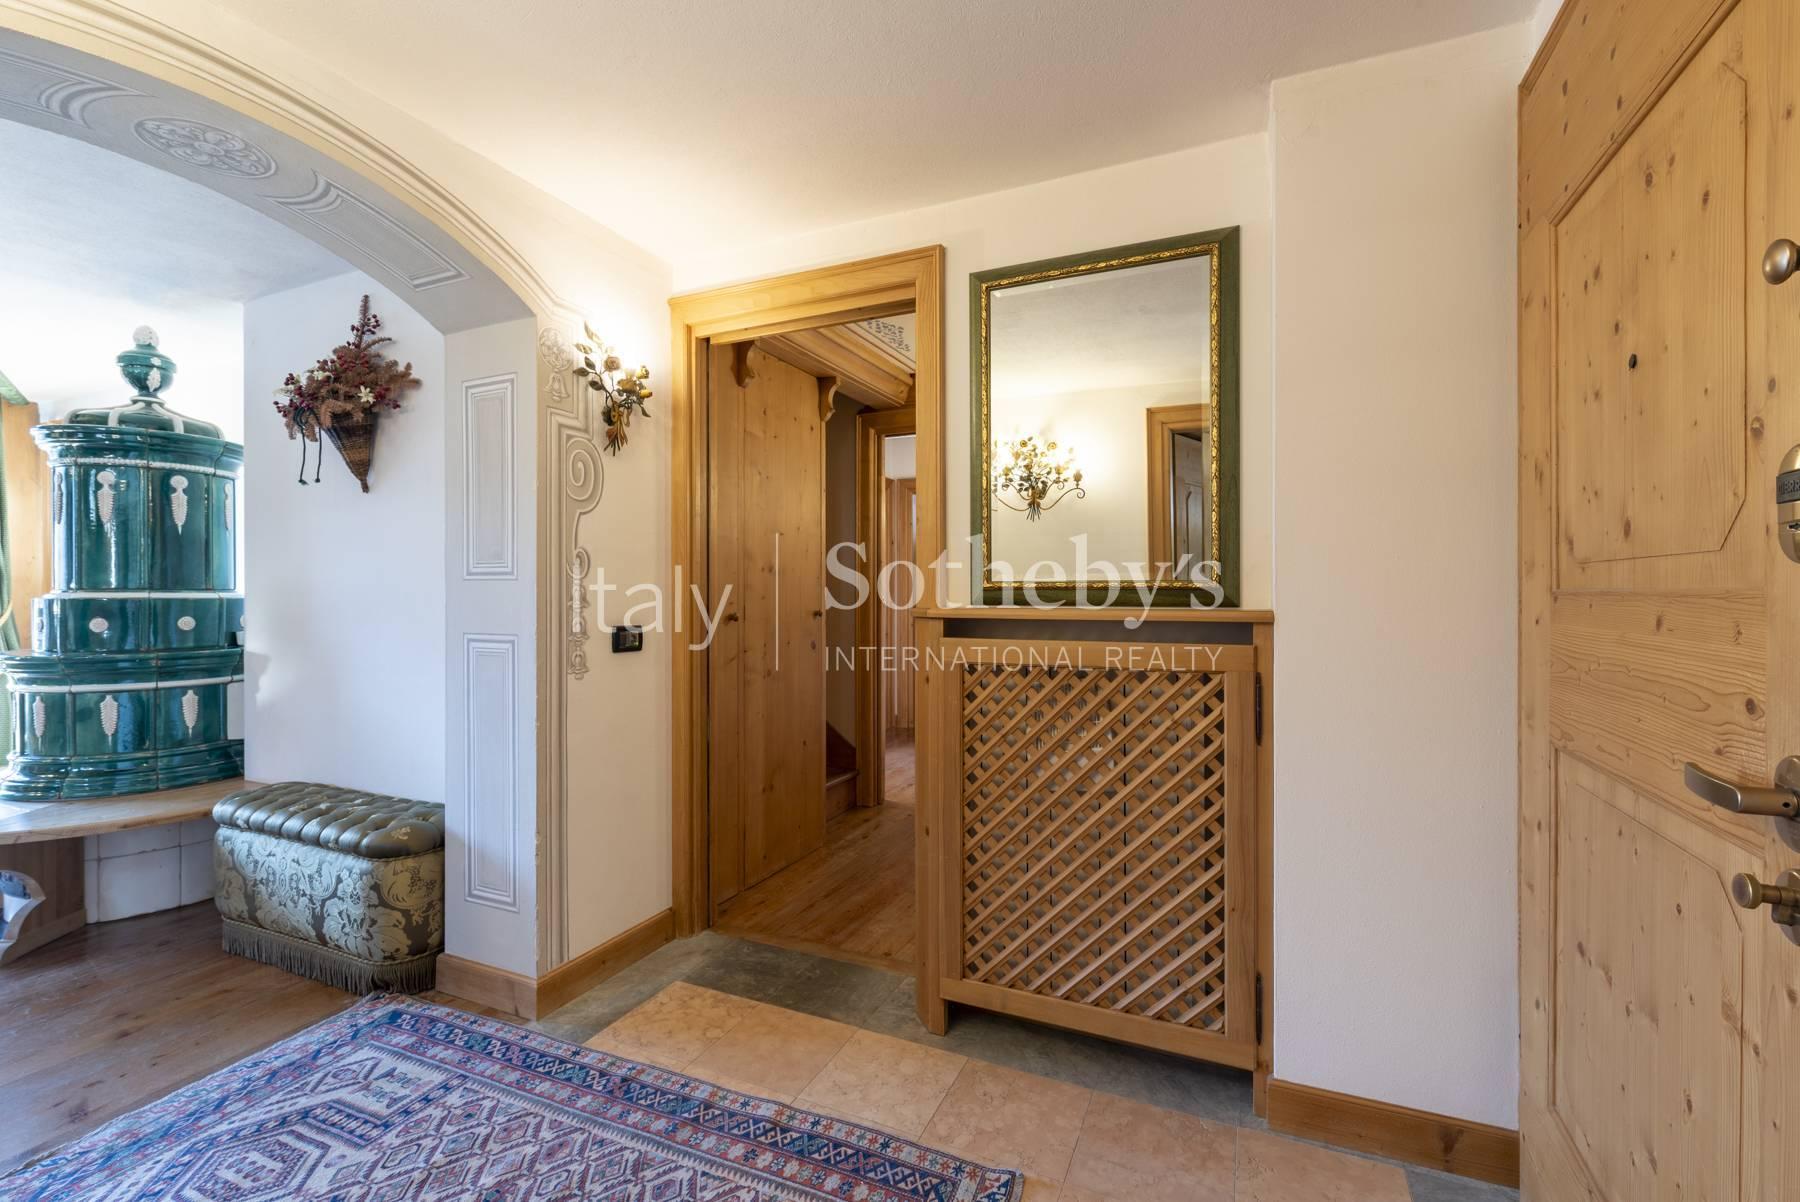 Penthouse with terrace in the heart of Cortina d'Ampezzo - 8